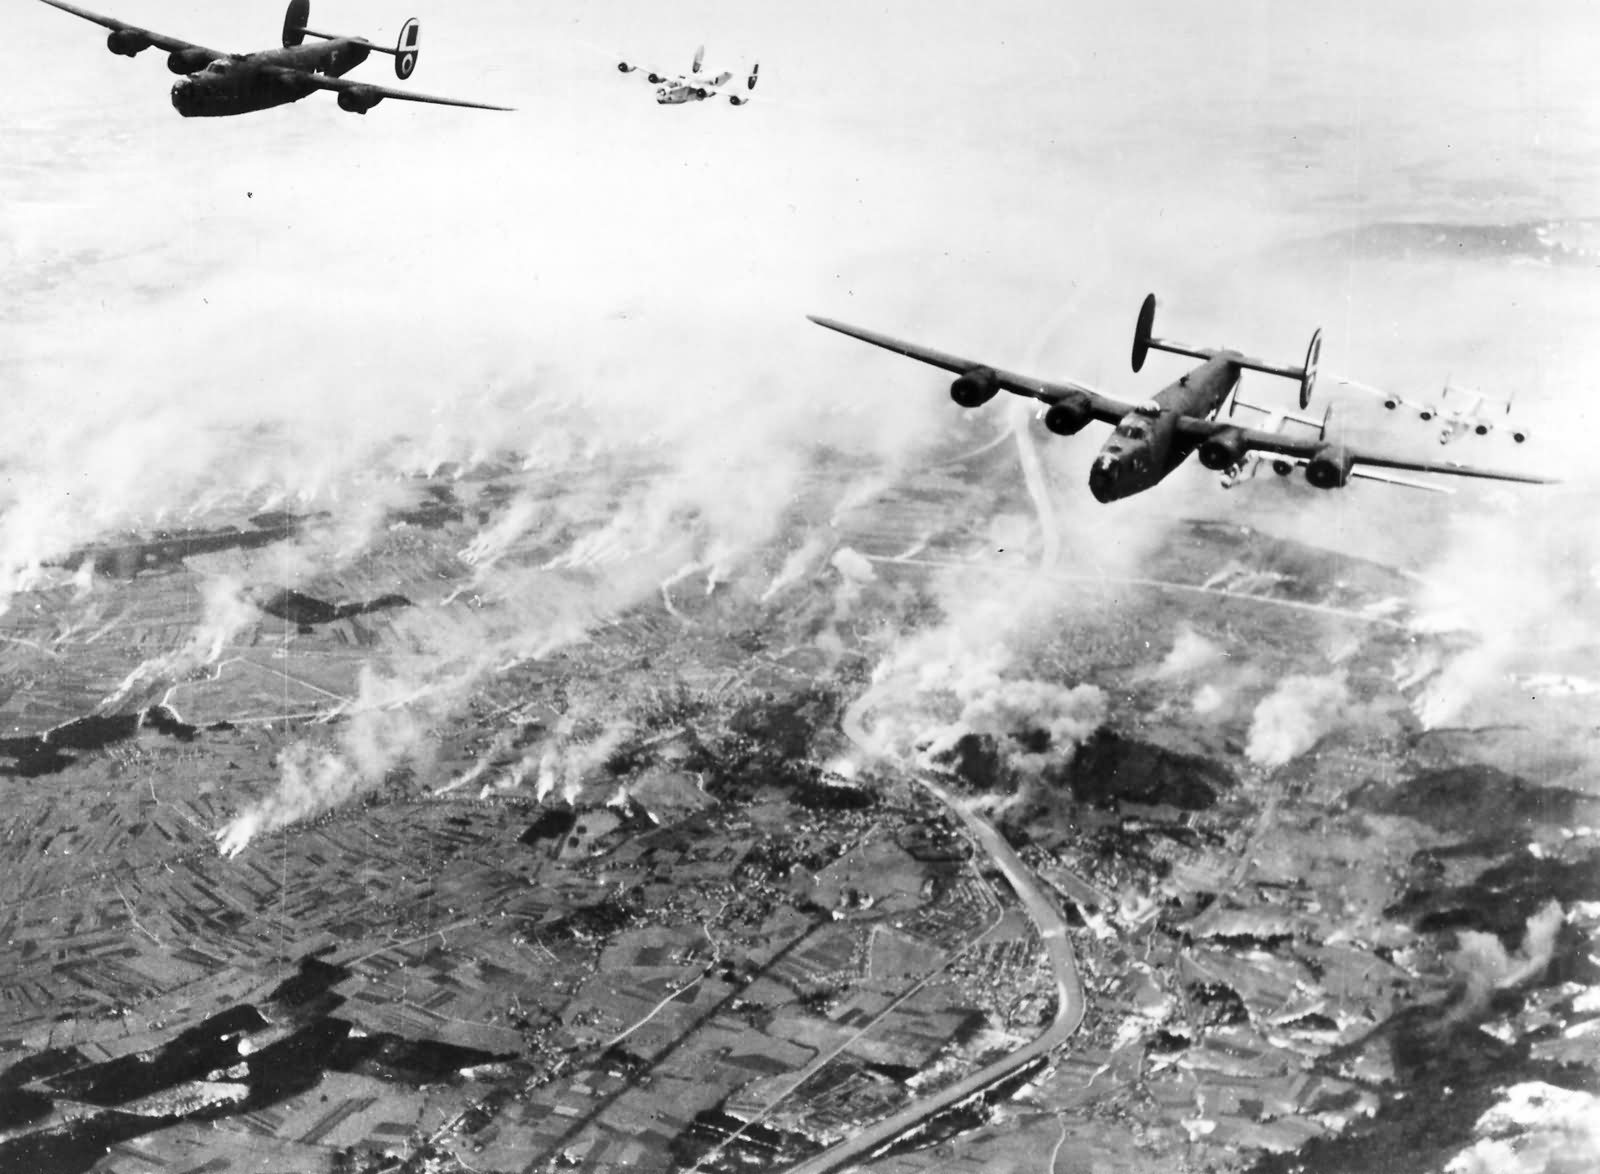 B-24 Liberators of the 460th Bomb Group, 15th Air Force flying from Spinazzola, Italy bombing the railroad yards in Salzburg, Austria, 22 Nov 1944. The smoke is from smudge pots lit to obscure the target.